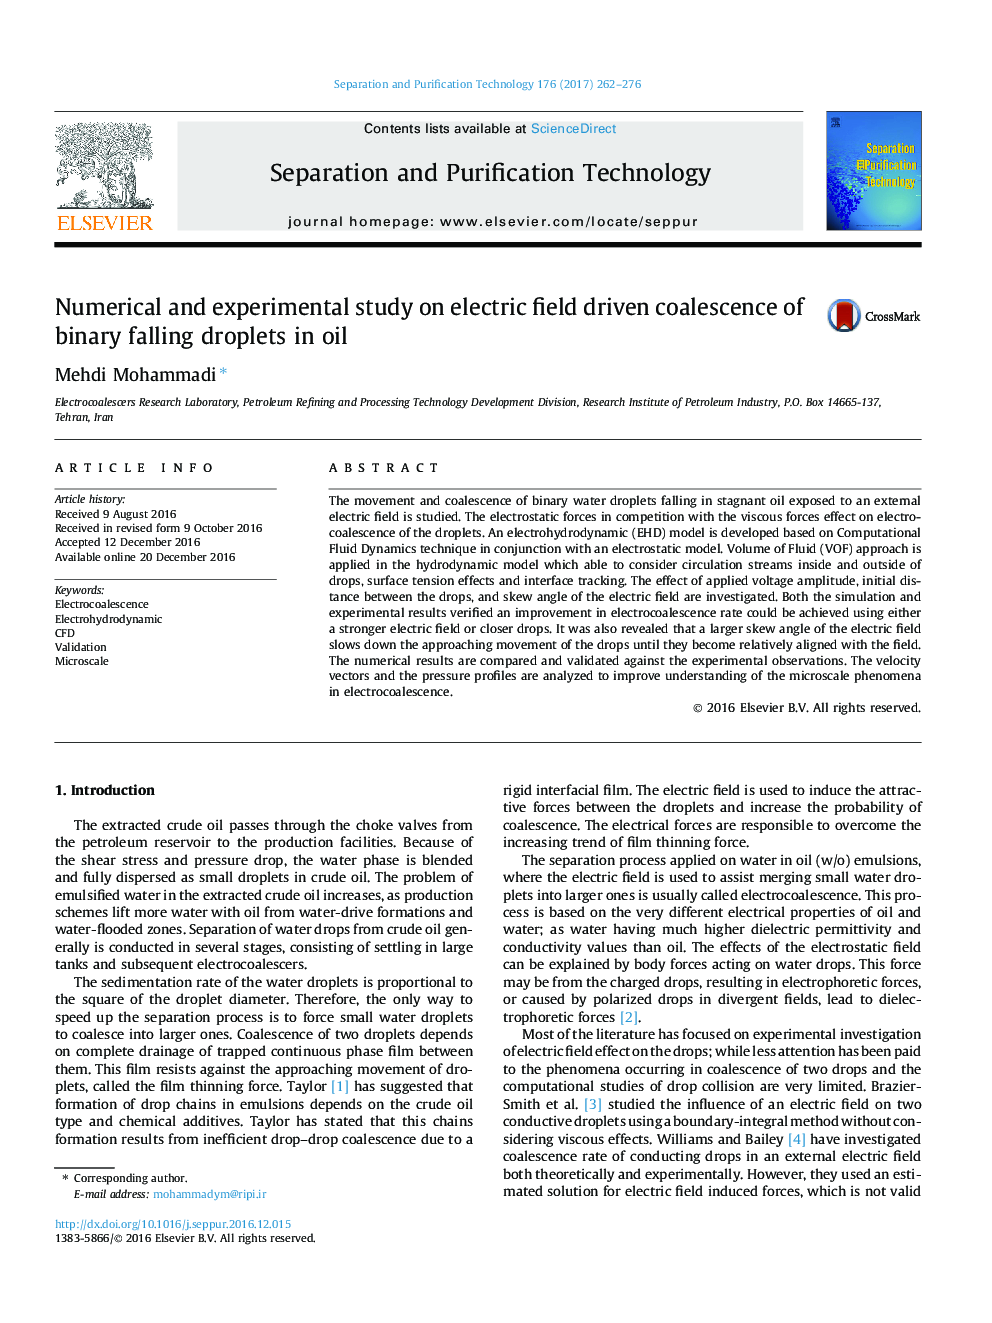 Numerical and experimental study on electric field driven coalescence of binary falling droplets in oil